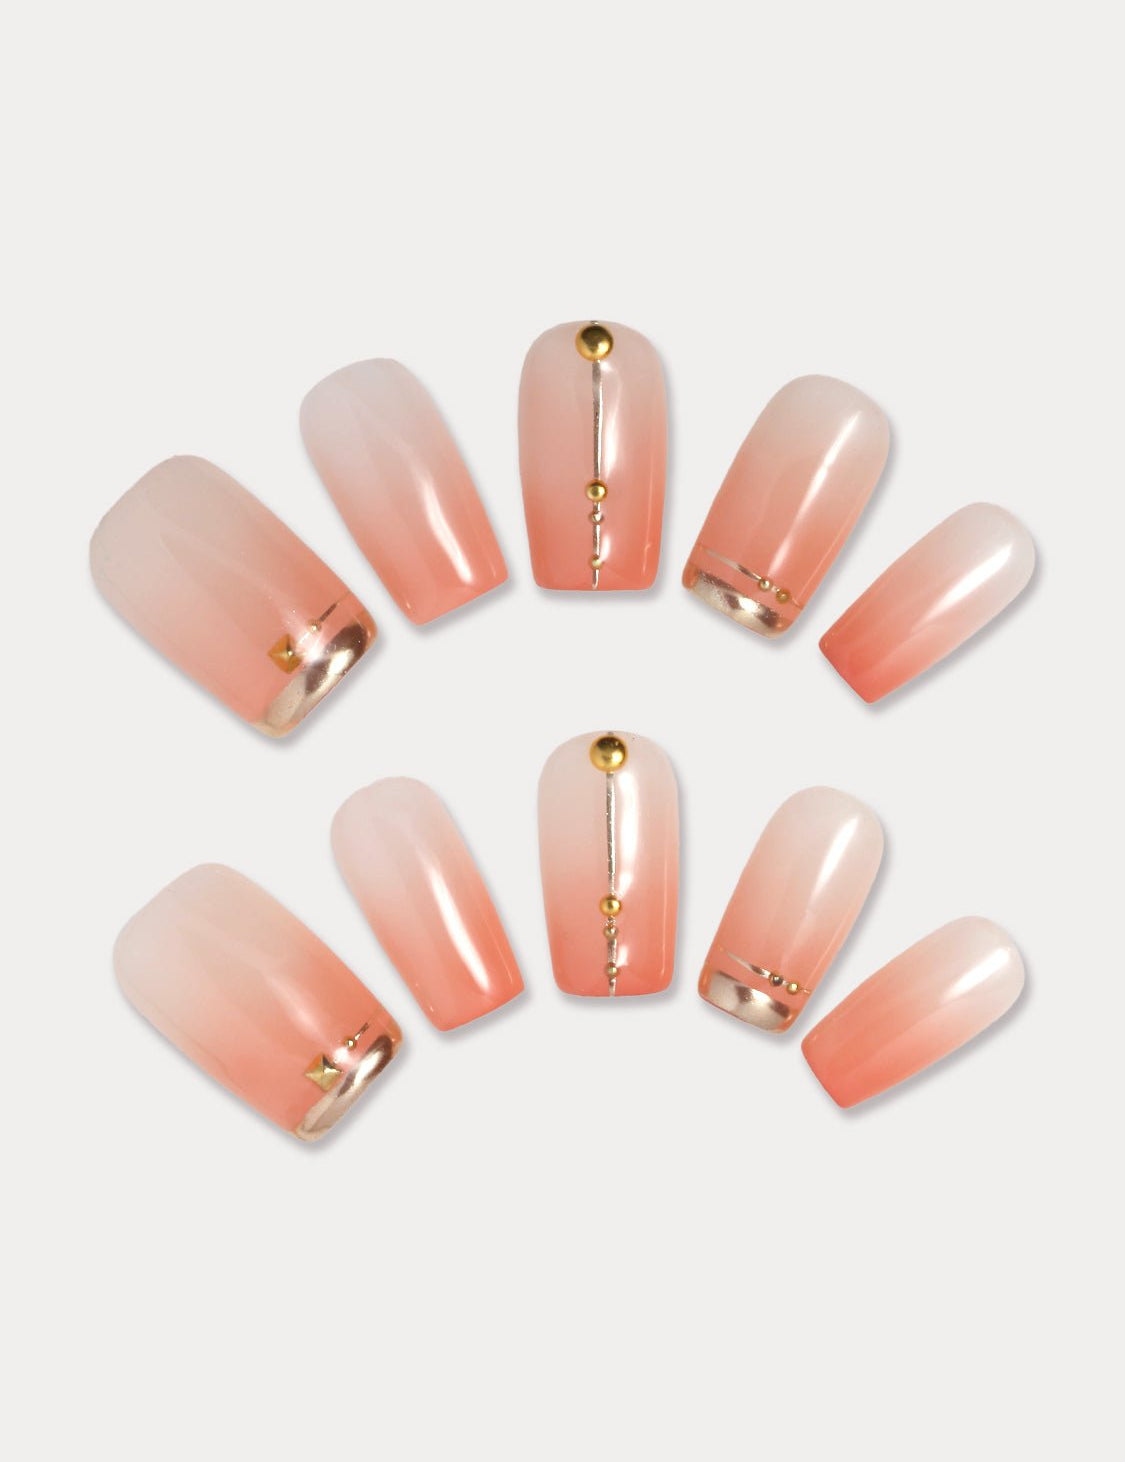 MIEAP Orange Pink Ombre press on nail set features an orange-pink ombre with square shape. The minimal gold lines and studs on the simple color bring a unique and stylish element to these artificial nails, making them anything but ordinary. #MIEAP #MIEAPnails #pressonnail #falsenail #acrylicnail #nails #nailart #naildesign #nailinspo #handmadenail #summernail #nail2023 #graduationnail #classicnail #squarenail #shortnail #ombrenail